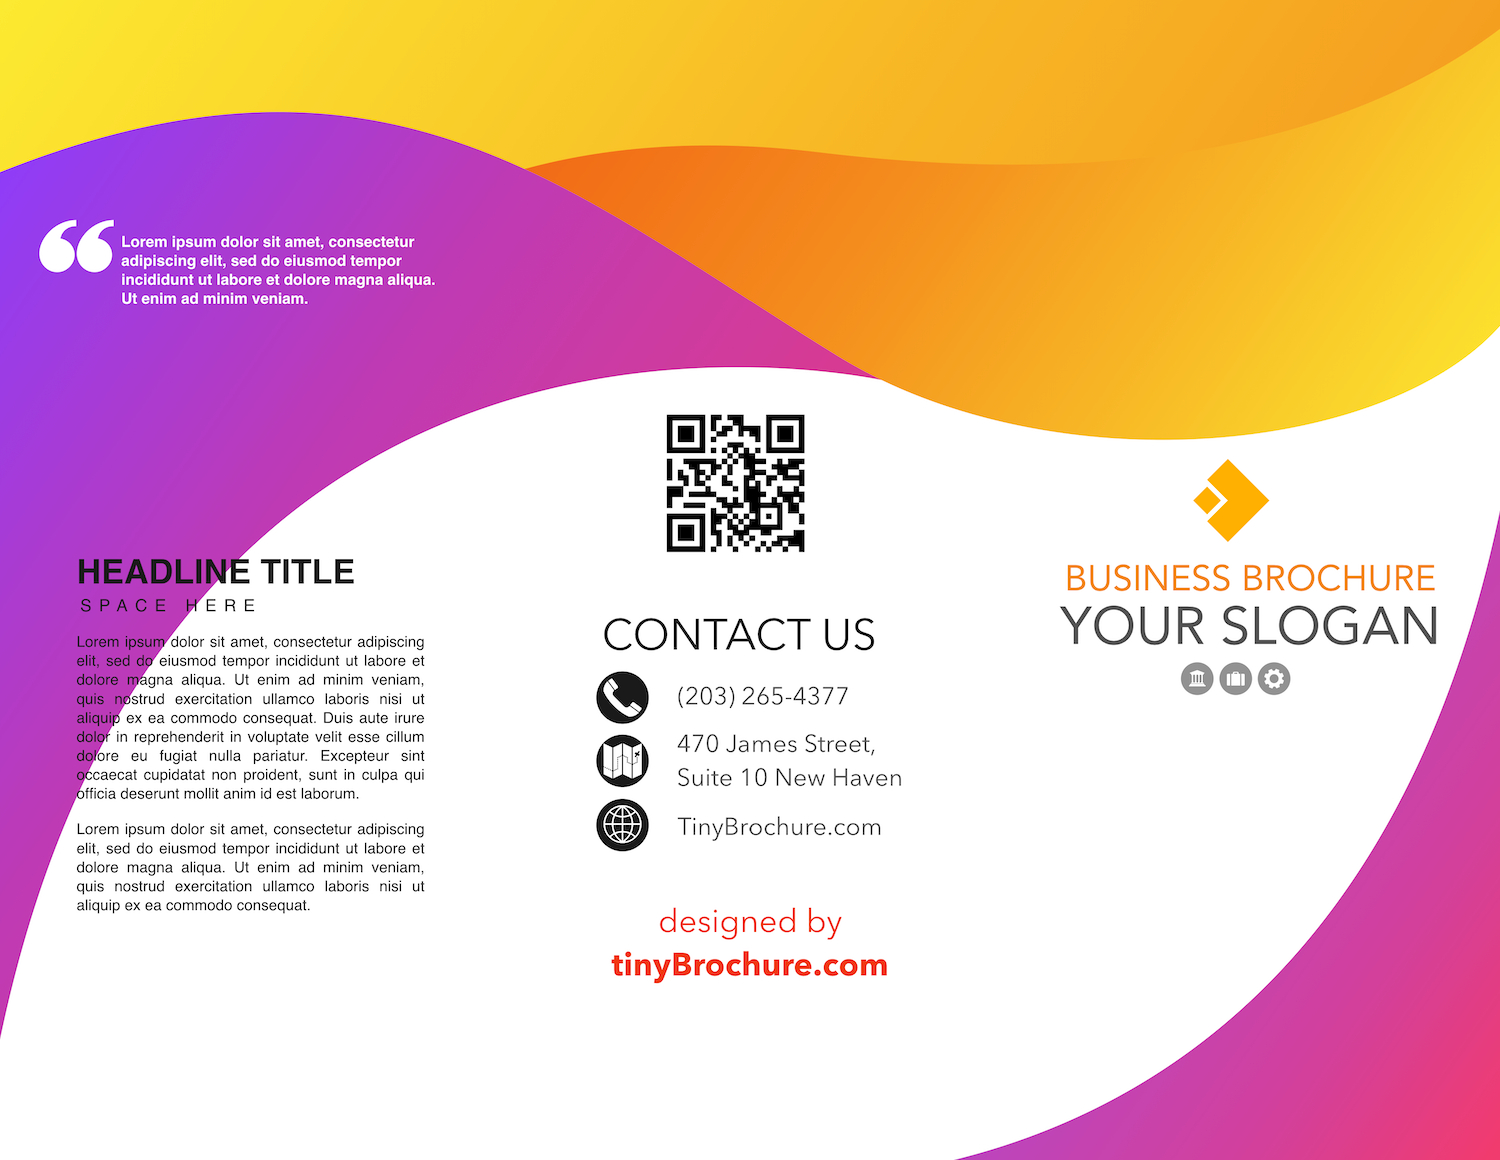 How To Make A Tri Fold Brochure In Google Docs Regarding Tri Fold Brochure Template Google Docs